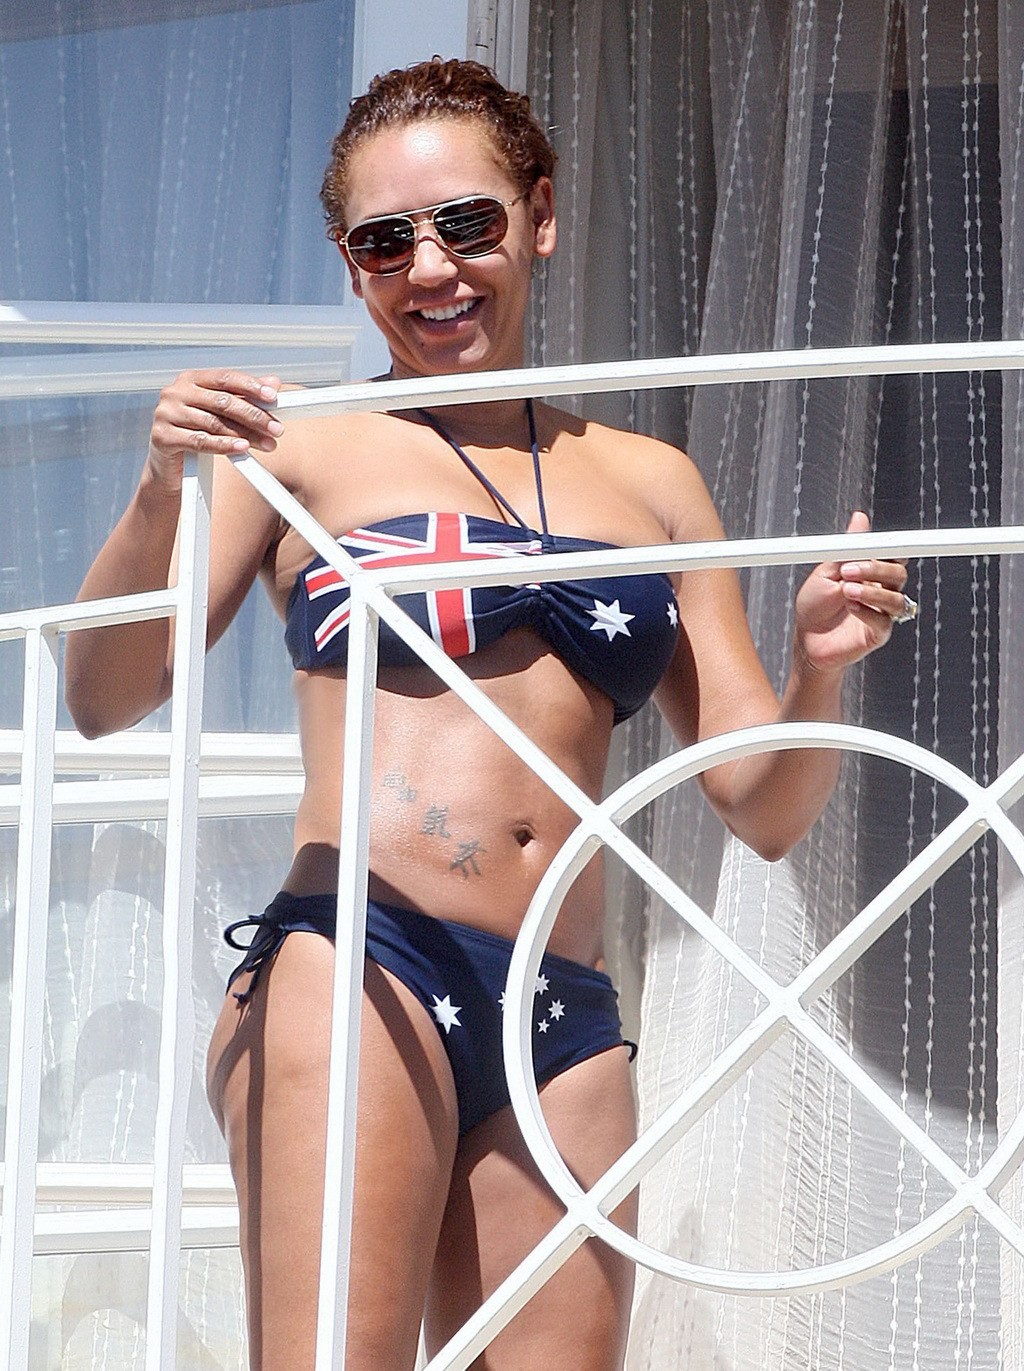 Melanie Brown in bikini caught by paparazzi while tanning on balcony in LA #75258287